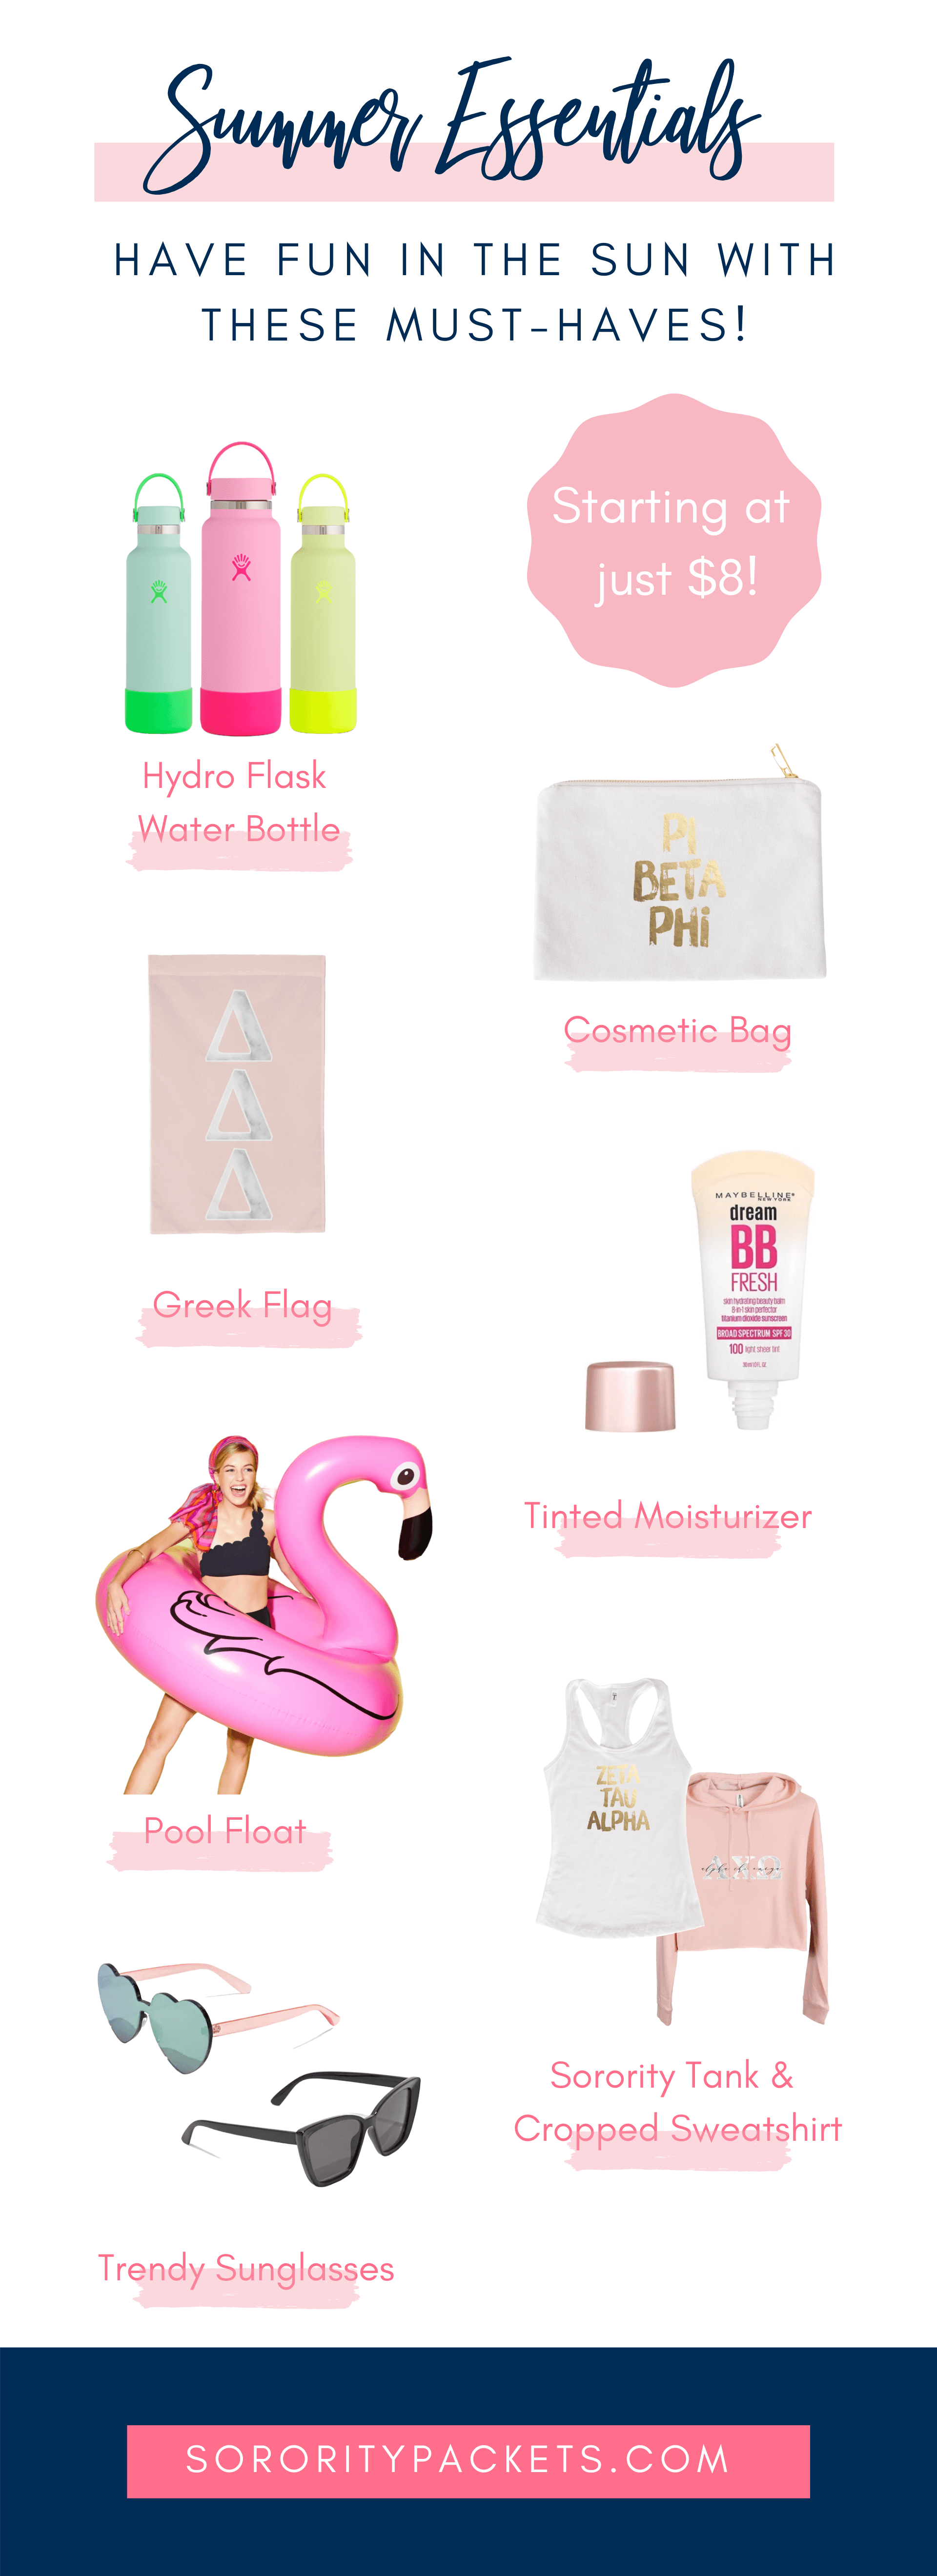 Summer Essentials: Have Fun in the Sun With These Sorority Gift Ideas ...